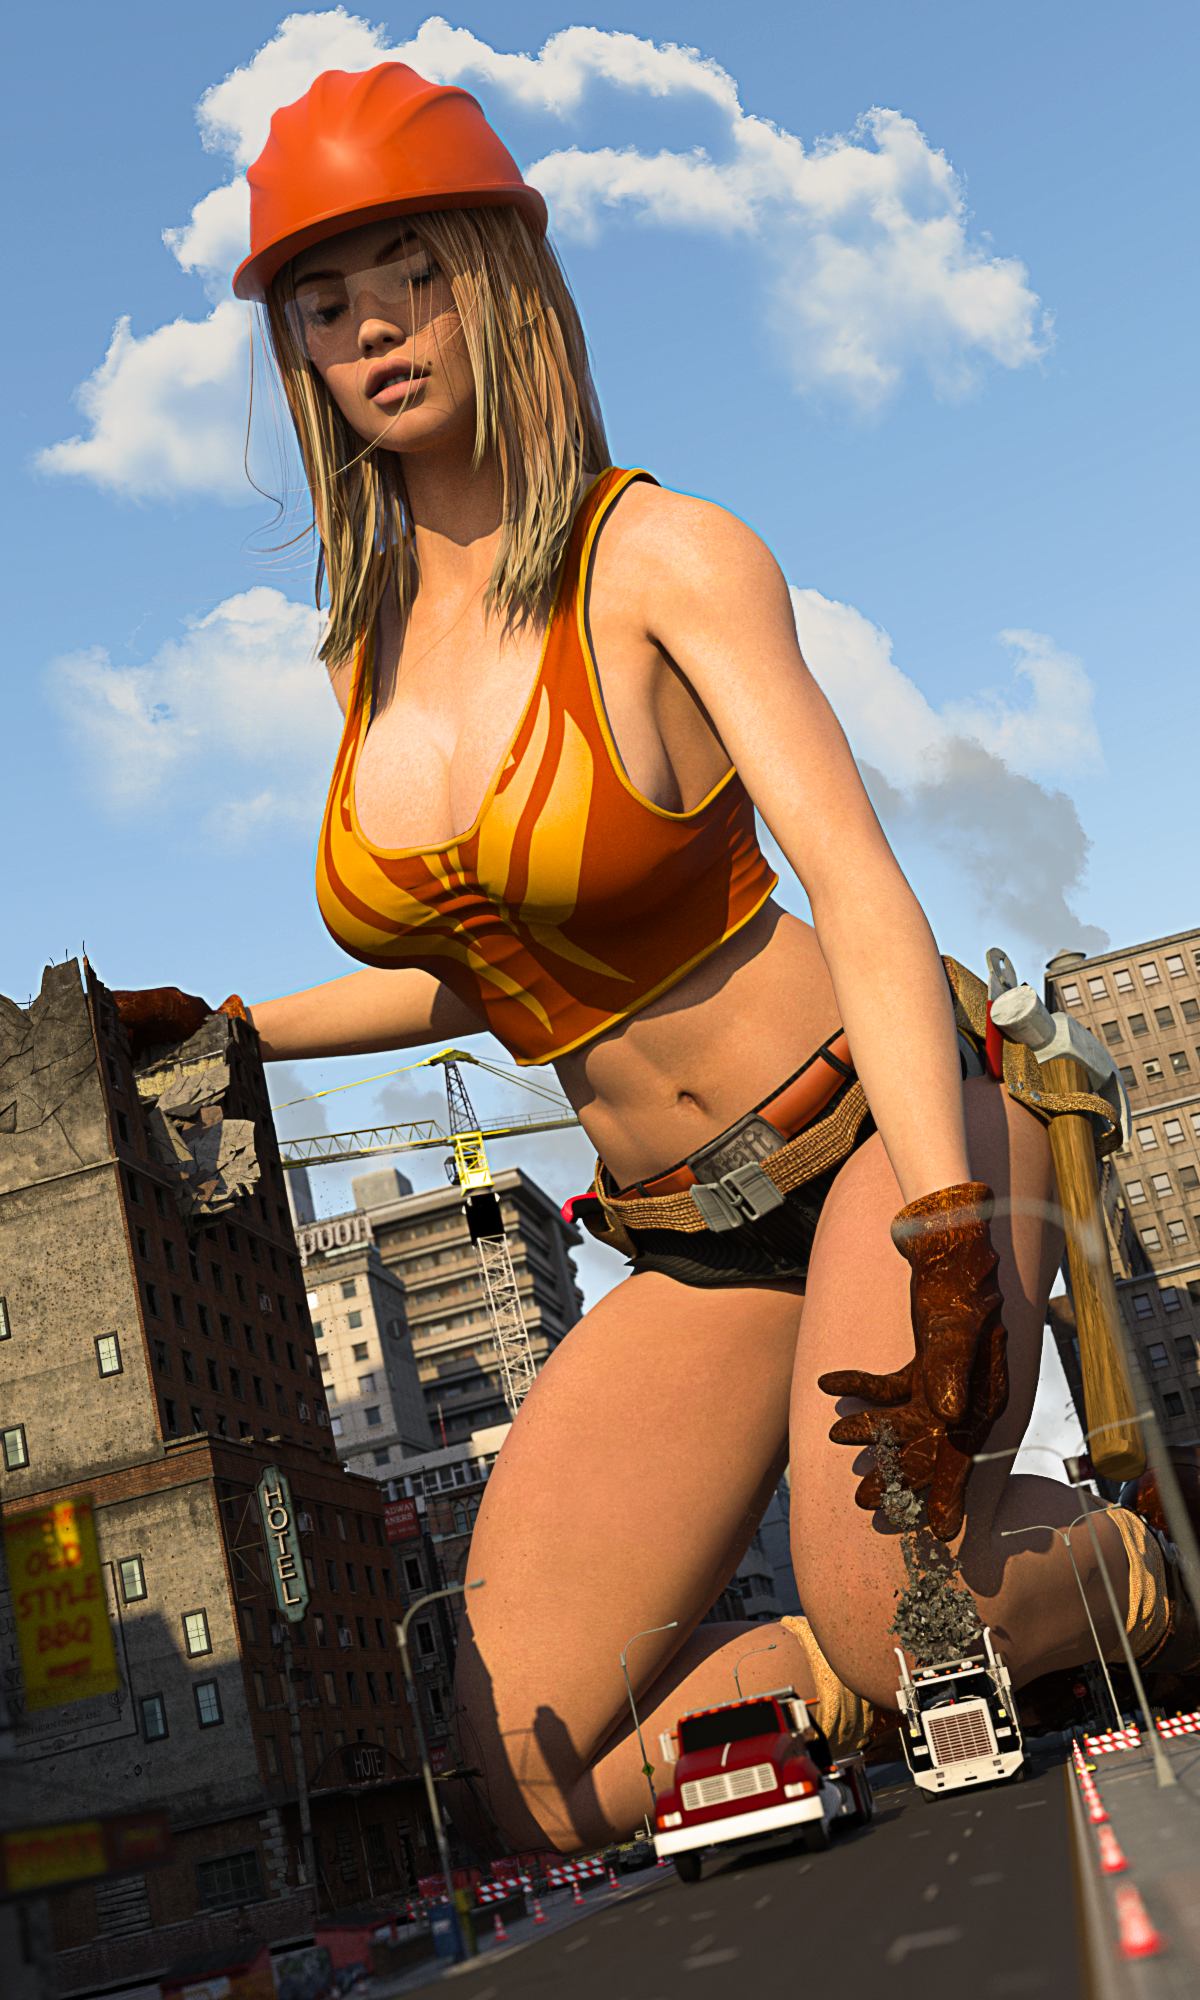 162815 - buildings building_demolition city cleavage clouds construction demolition giantess hard_hat low_angle mike973 poser safety_glasses sky street trucks